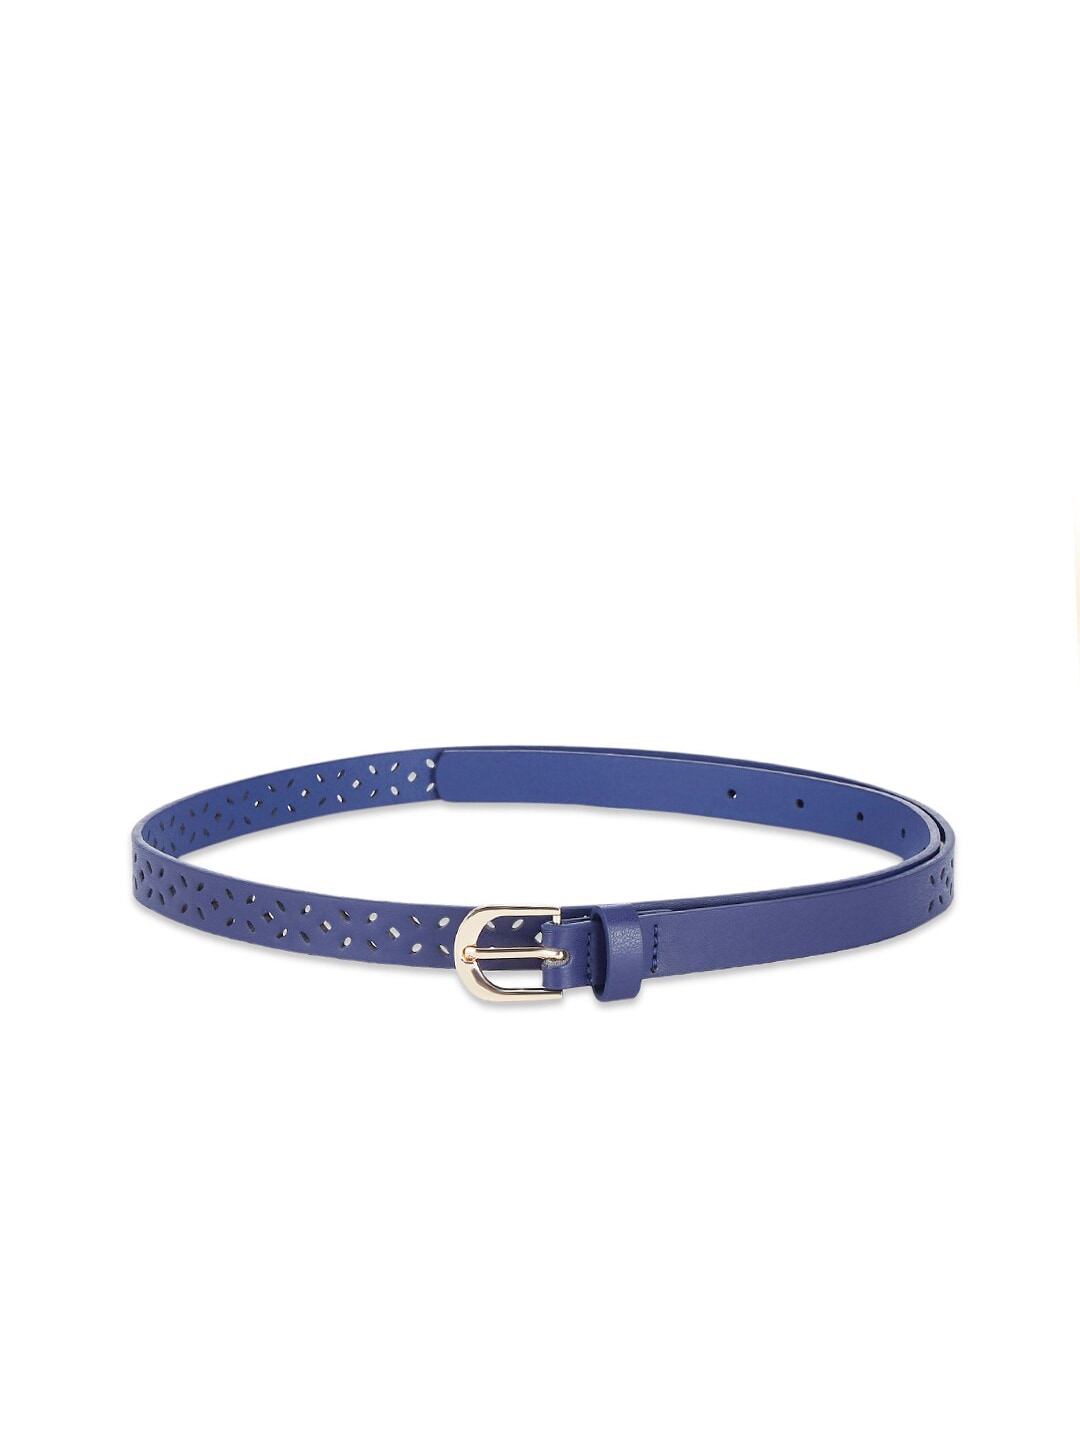 Forever Glam by Pantaloons Women Navy Blue PU Belt Price in India